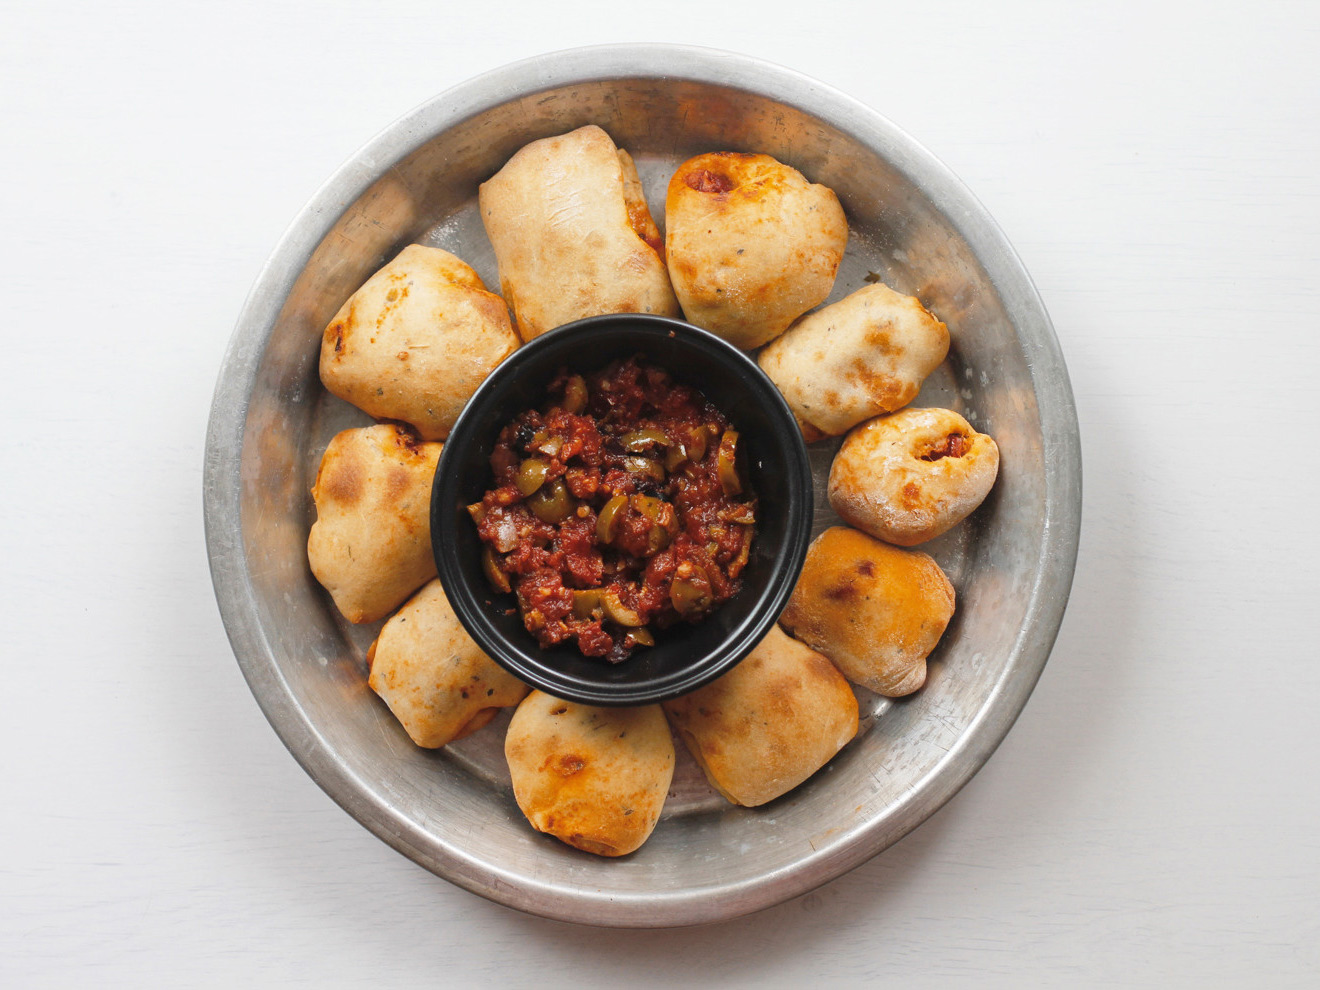 In the kitchen with Kelley: Healthy 4-ingredient pizza rolls